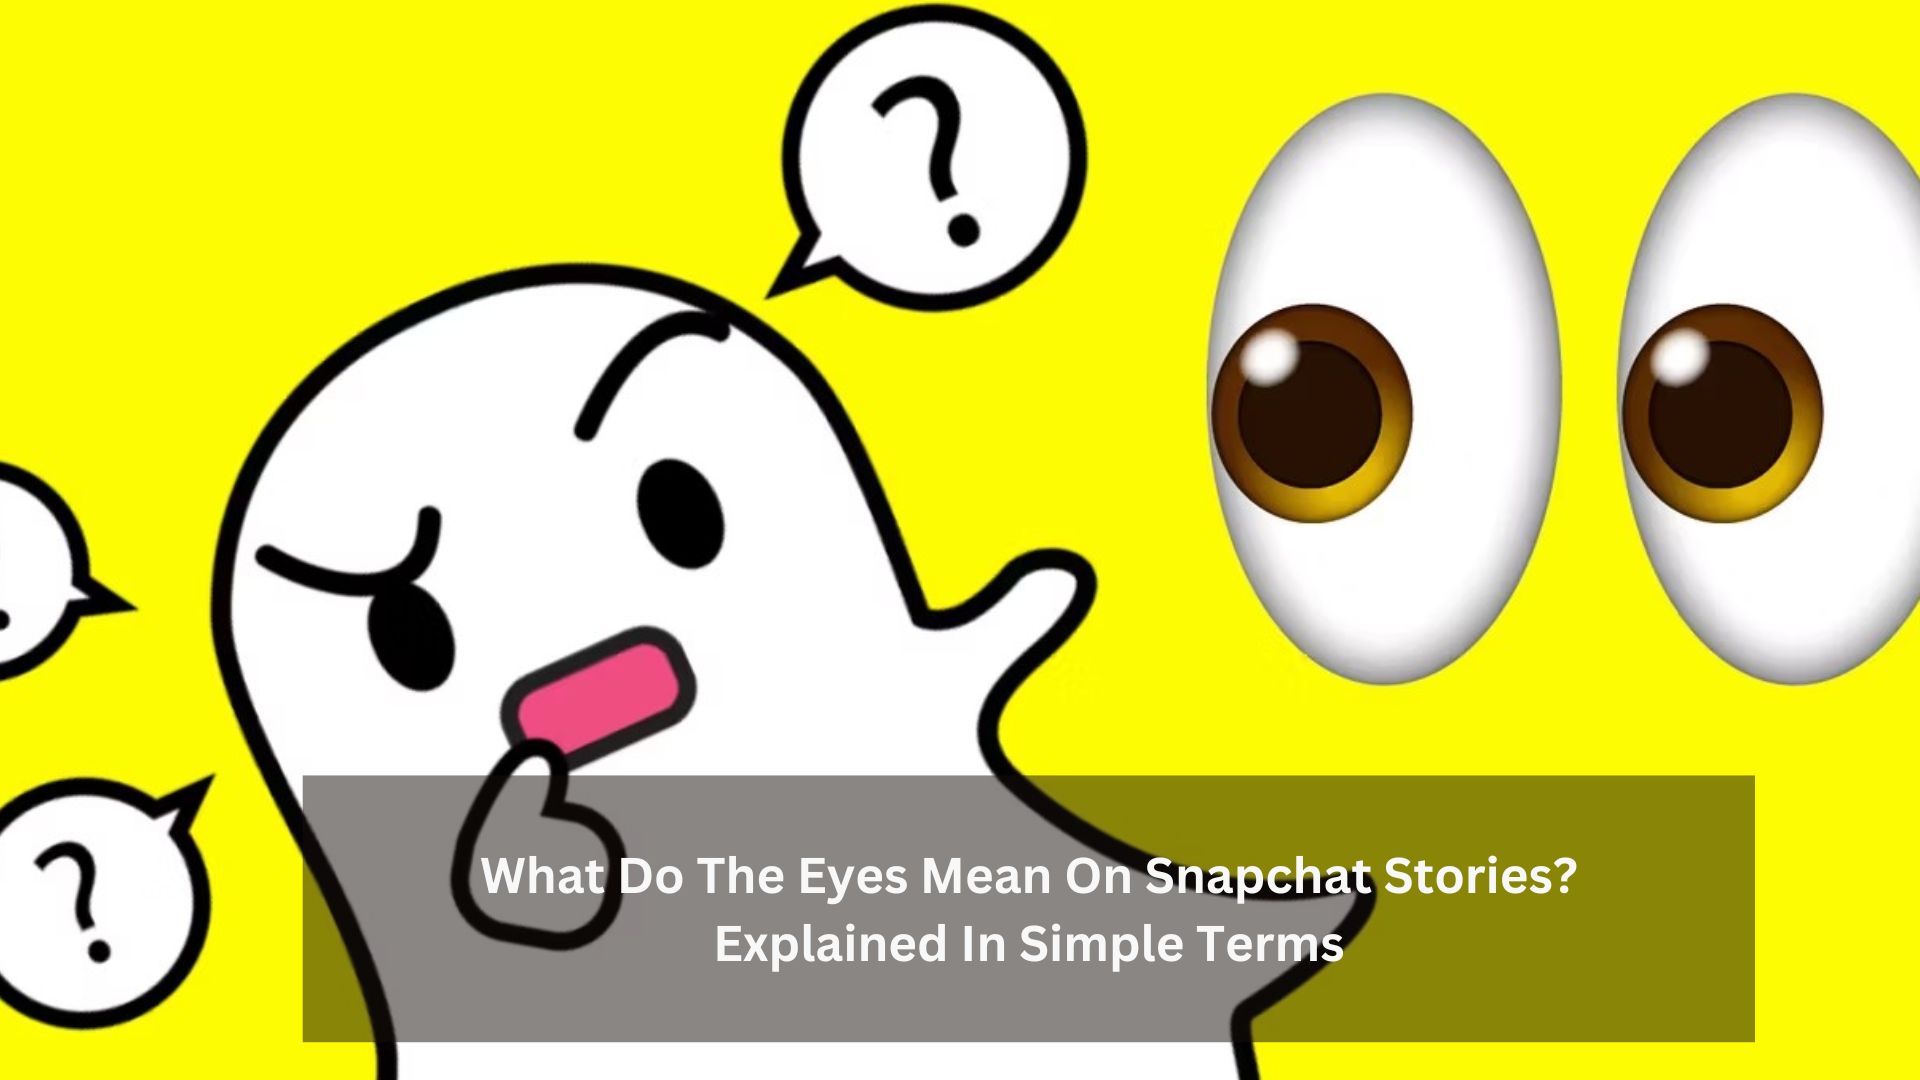 What Do The Eyes Mean On Snapchat Stories? Explained In Simple Terms